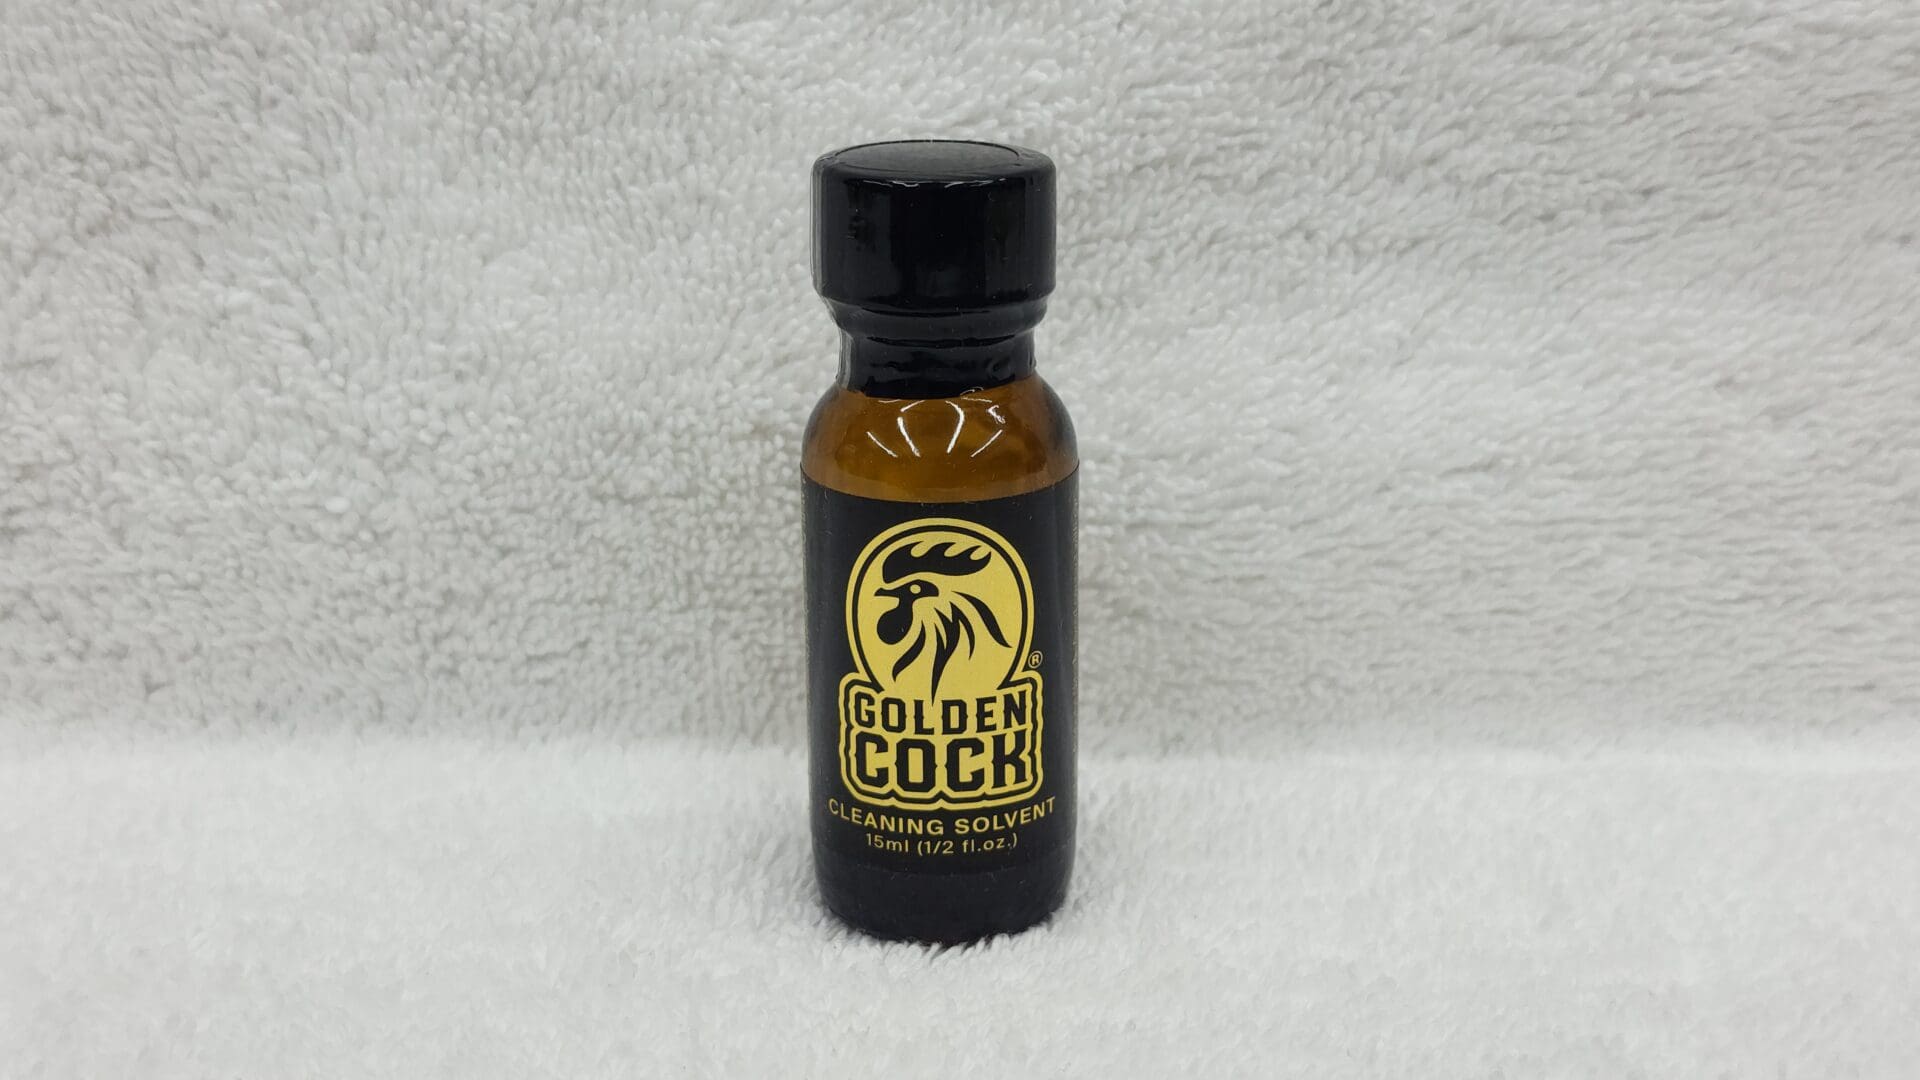 A bottle of Golden Cock Original cleaning solvent, 2 fl oz size, on a white textured background.